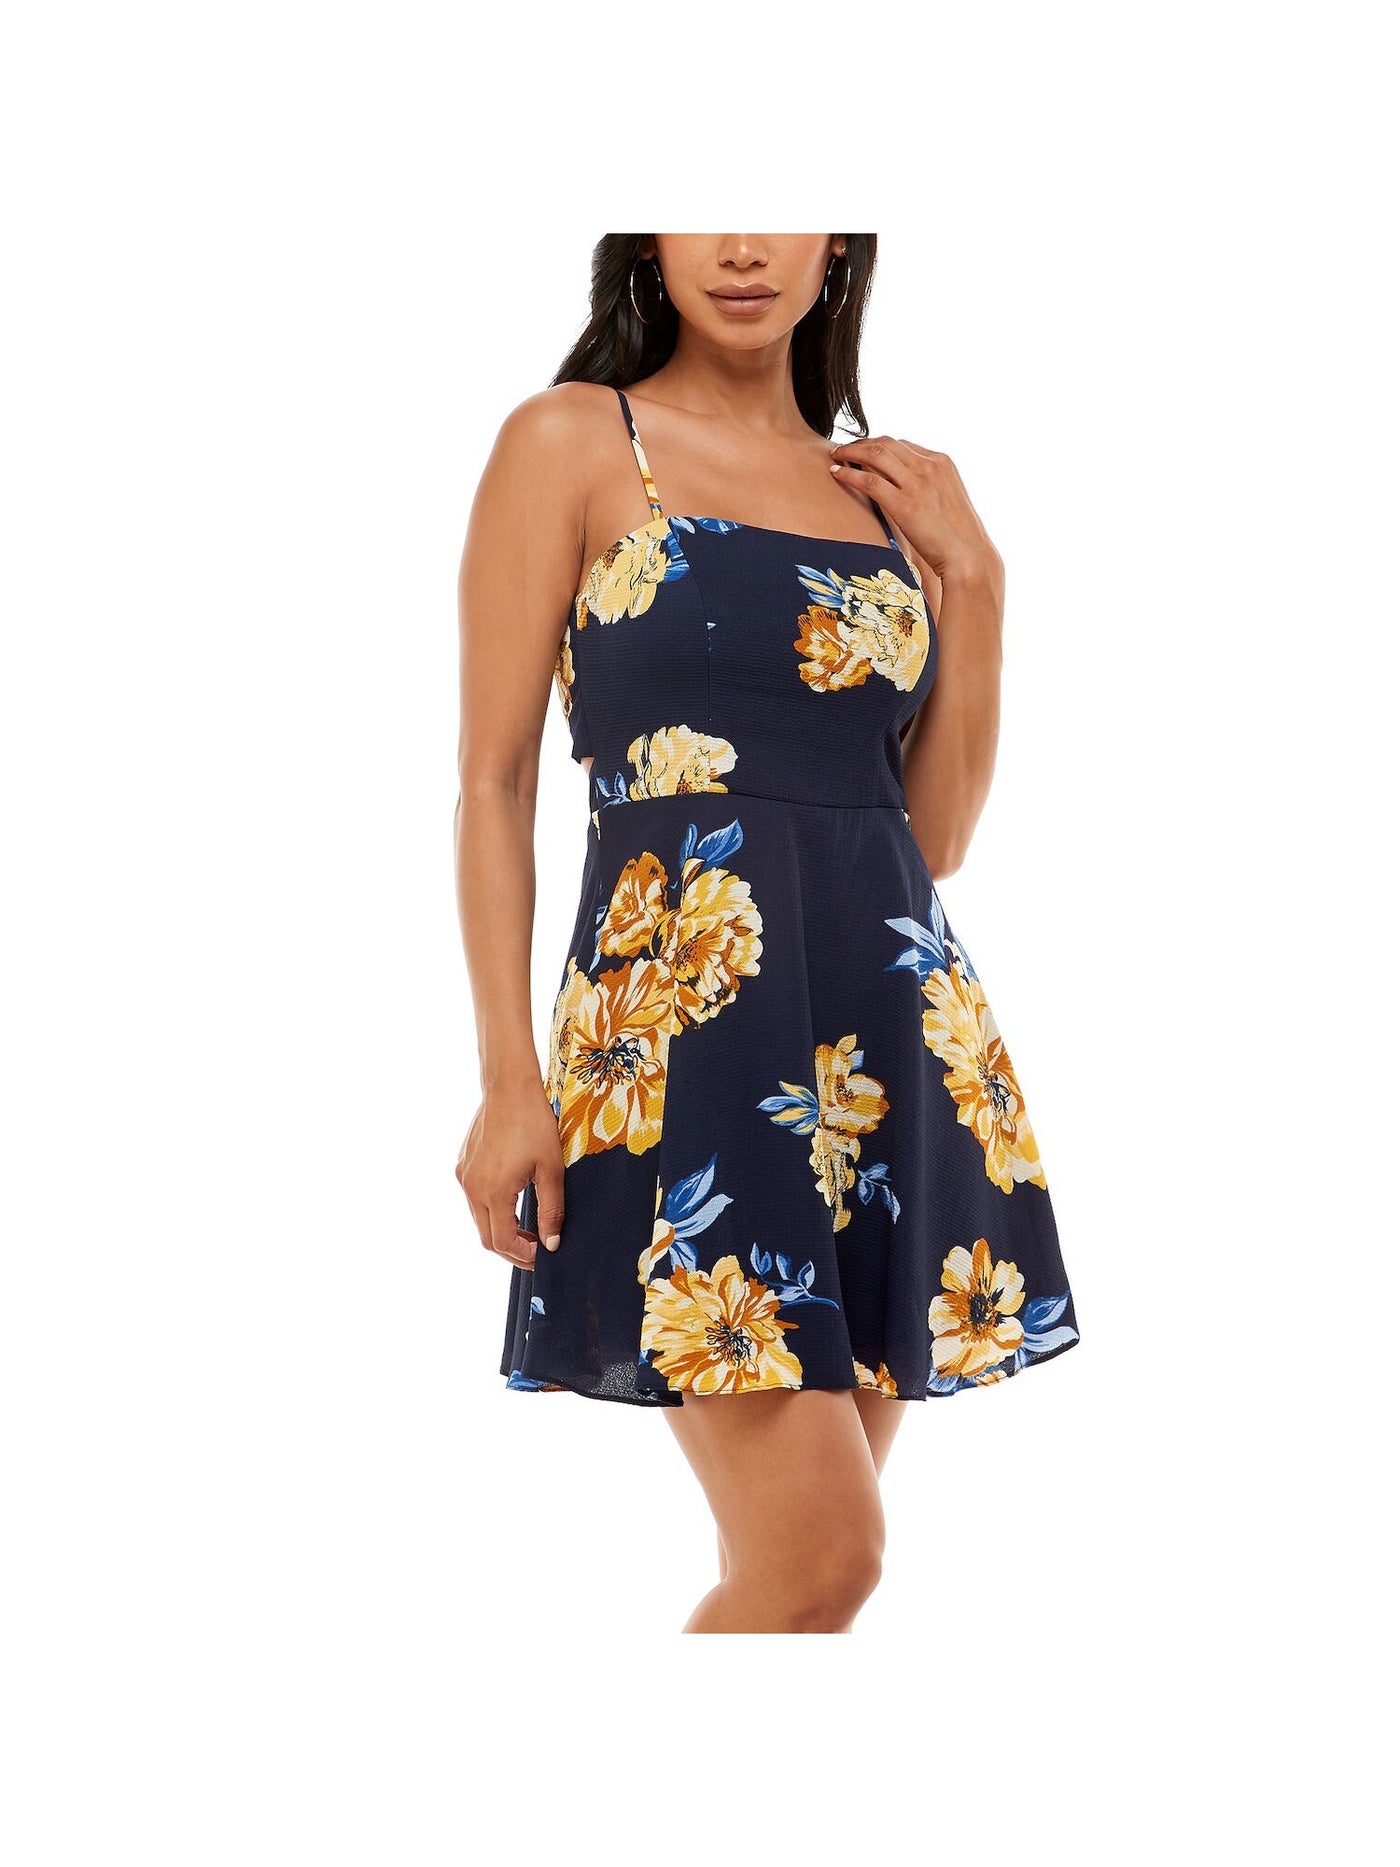 B DARLIN Womens Navy Zippered Tie Rounded Hem Lined Floral Spaghetti Strap Above The Knee Party Fit + Flare Dress Juniors 13\14